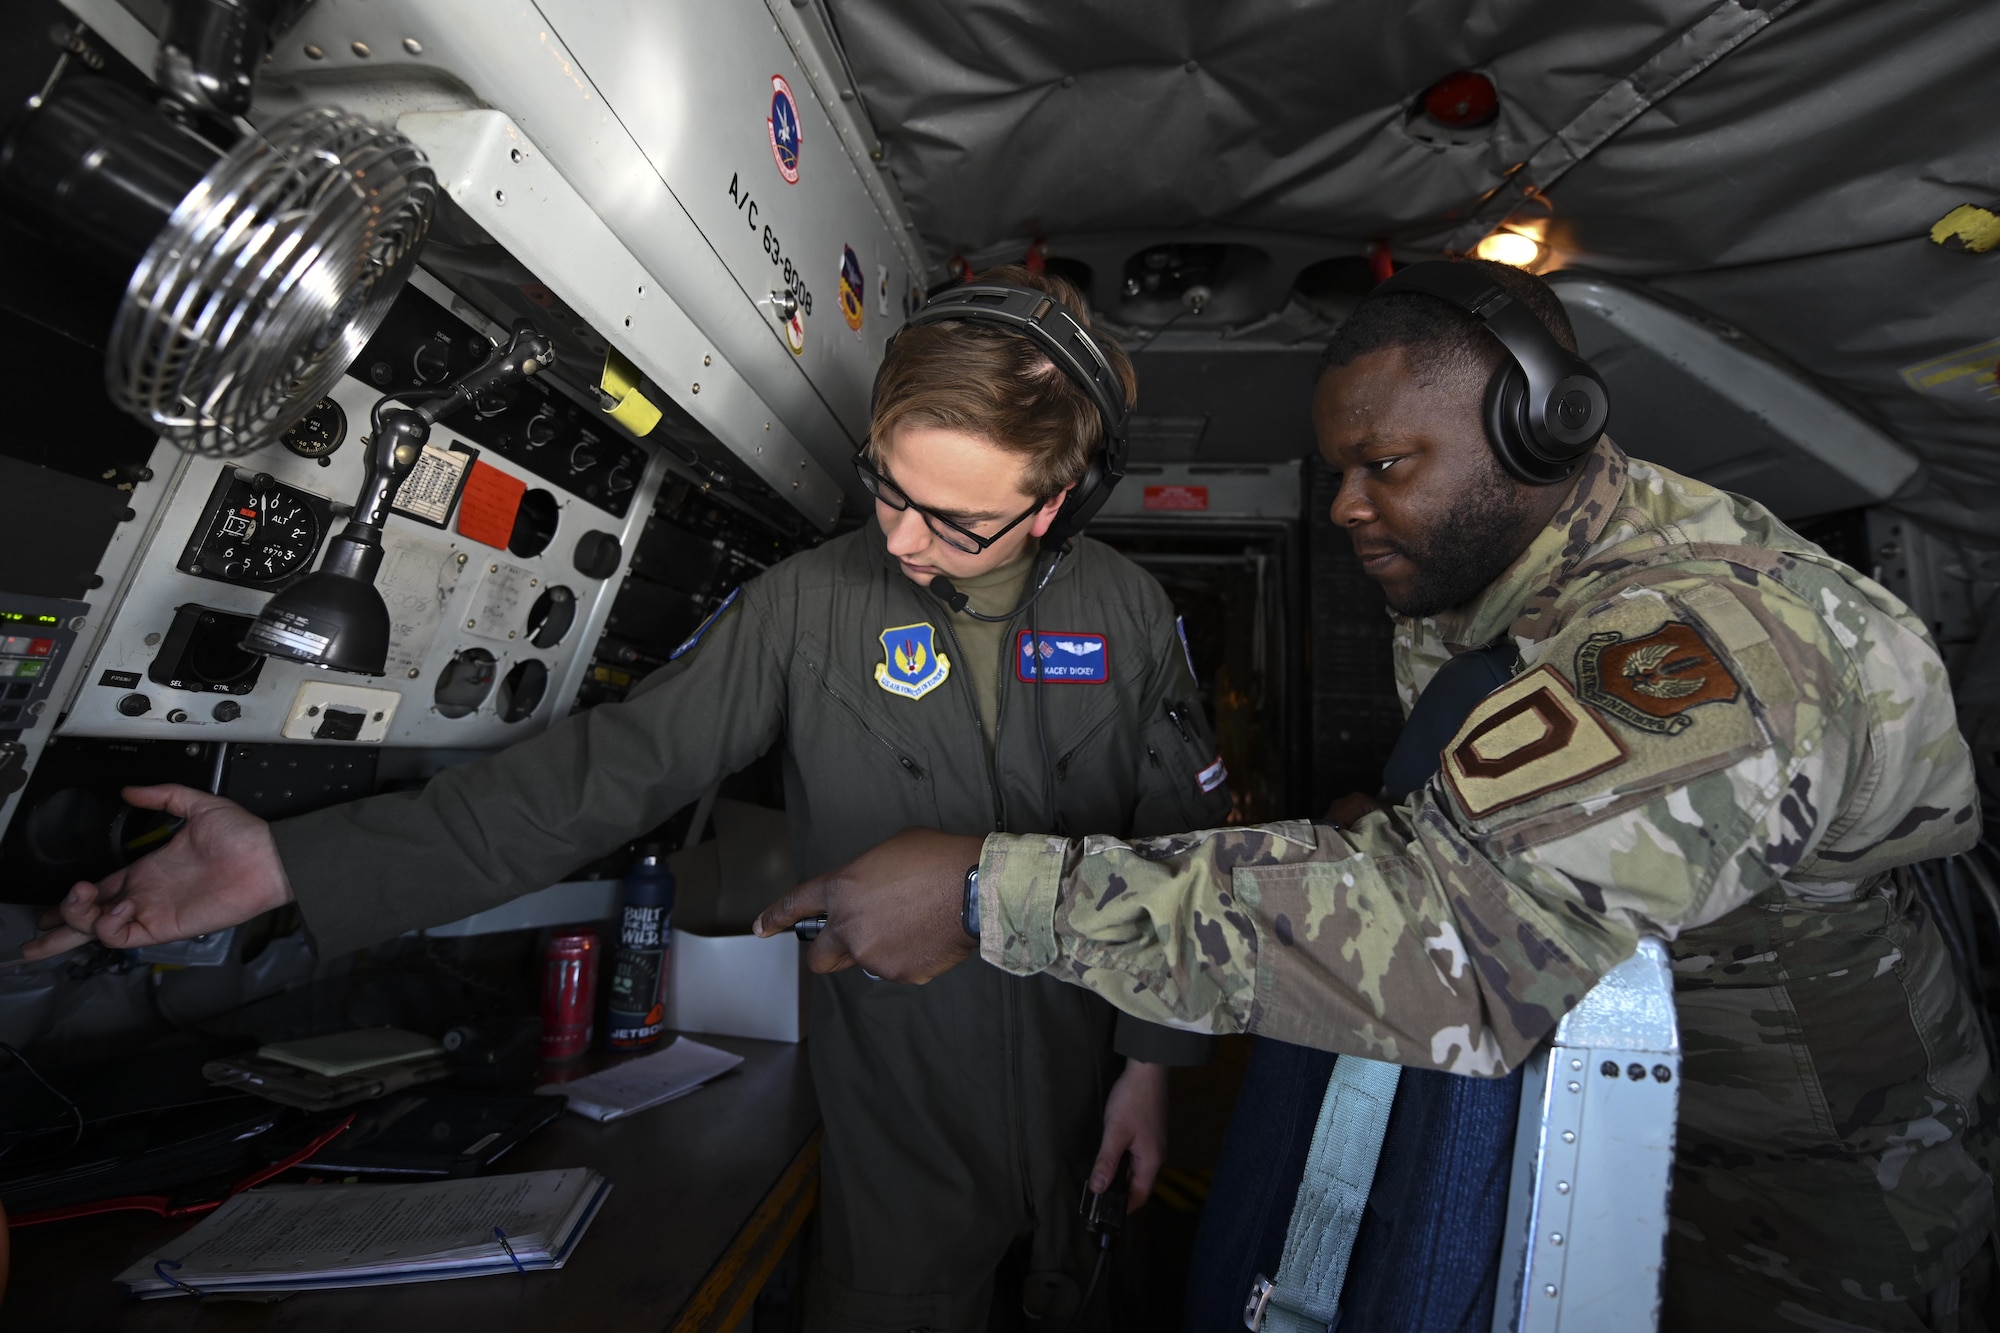 U.S. Air Force Senior Airman Santonio Portis, right, 100th Aircraft Maintenance Squadron electrical and environmental journeyman, and Airman 1st Class Kacey Dickey, 351st Air Refueling Squadron boom operator, troubleshoot a power supply on board a KC-135 Stratotanker aircraft assigned to the 100th Air Refueling Wing, Royal Air Force Mildenhall, England, during exercise High Life over the North Sea, Sept. 15, 2021. The 100th Air Refueling Wing continuously exercises ways to improve its defense capabilities to ensure its advantage in resiliency and to protect its assets and personnel and support its allies. (U.S. Air Force photo by Senior Airman Joseph Barron)